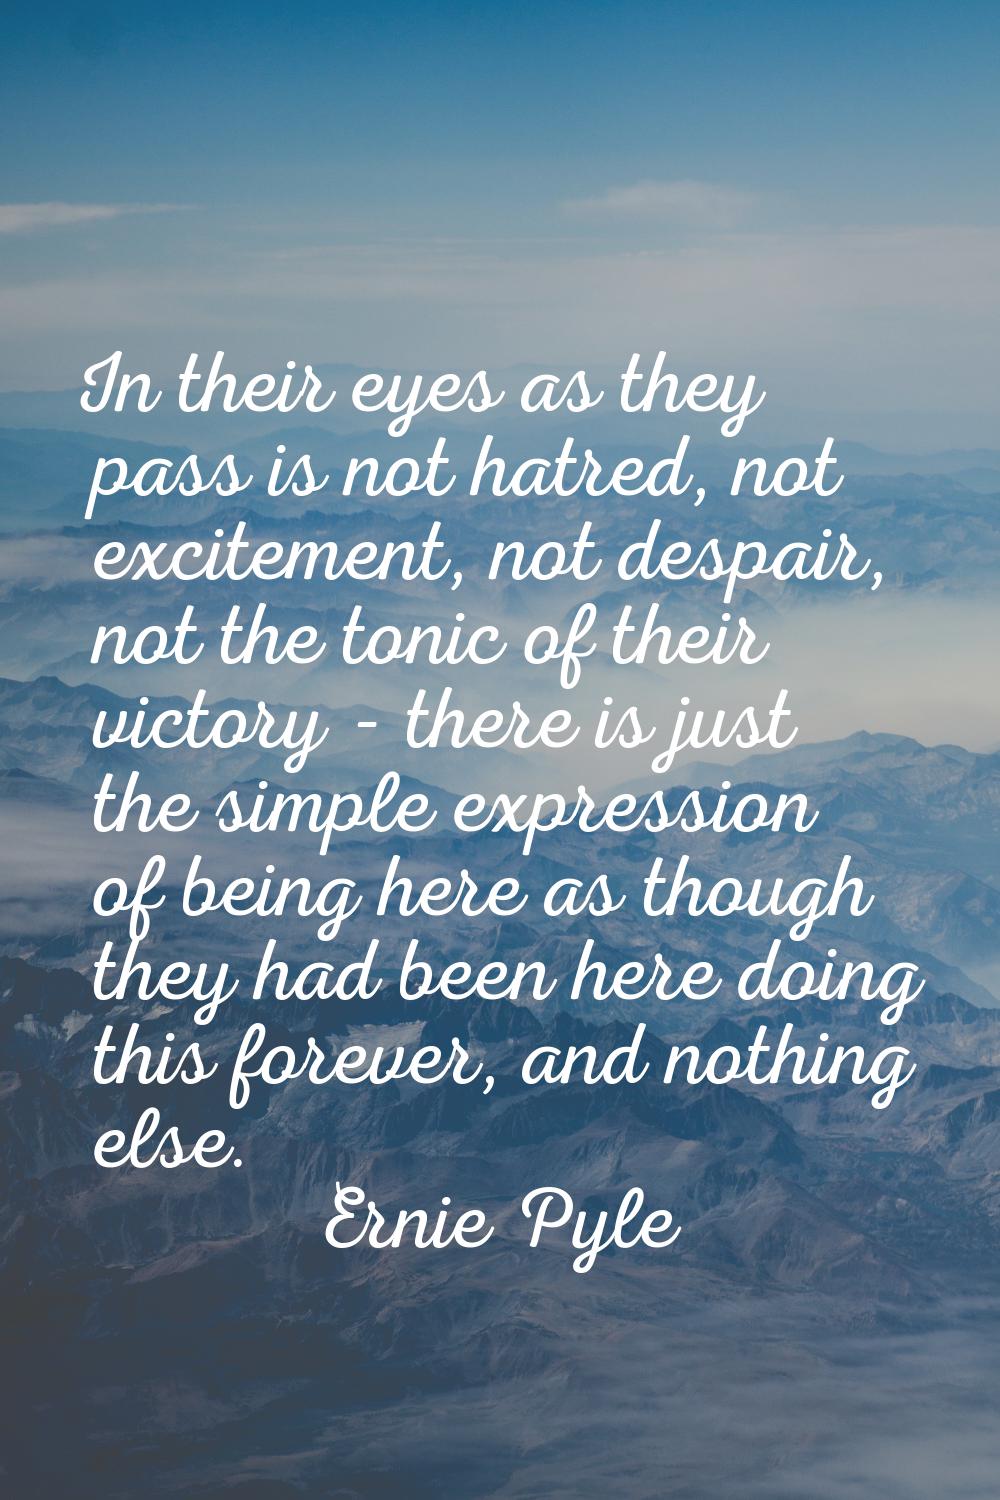 In their eyes as they pass is not hatred, not excitement, not despair, not the tonic of their victo